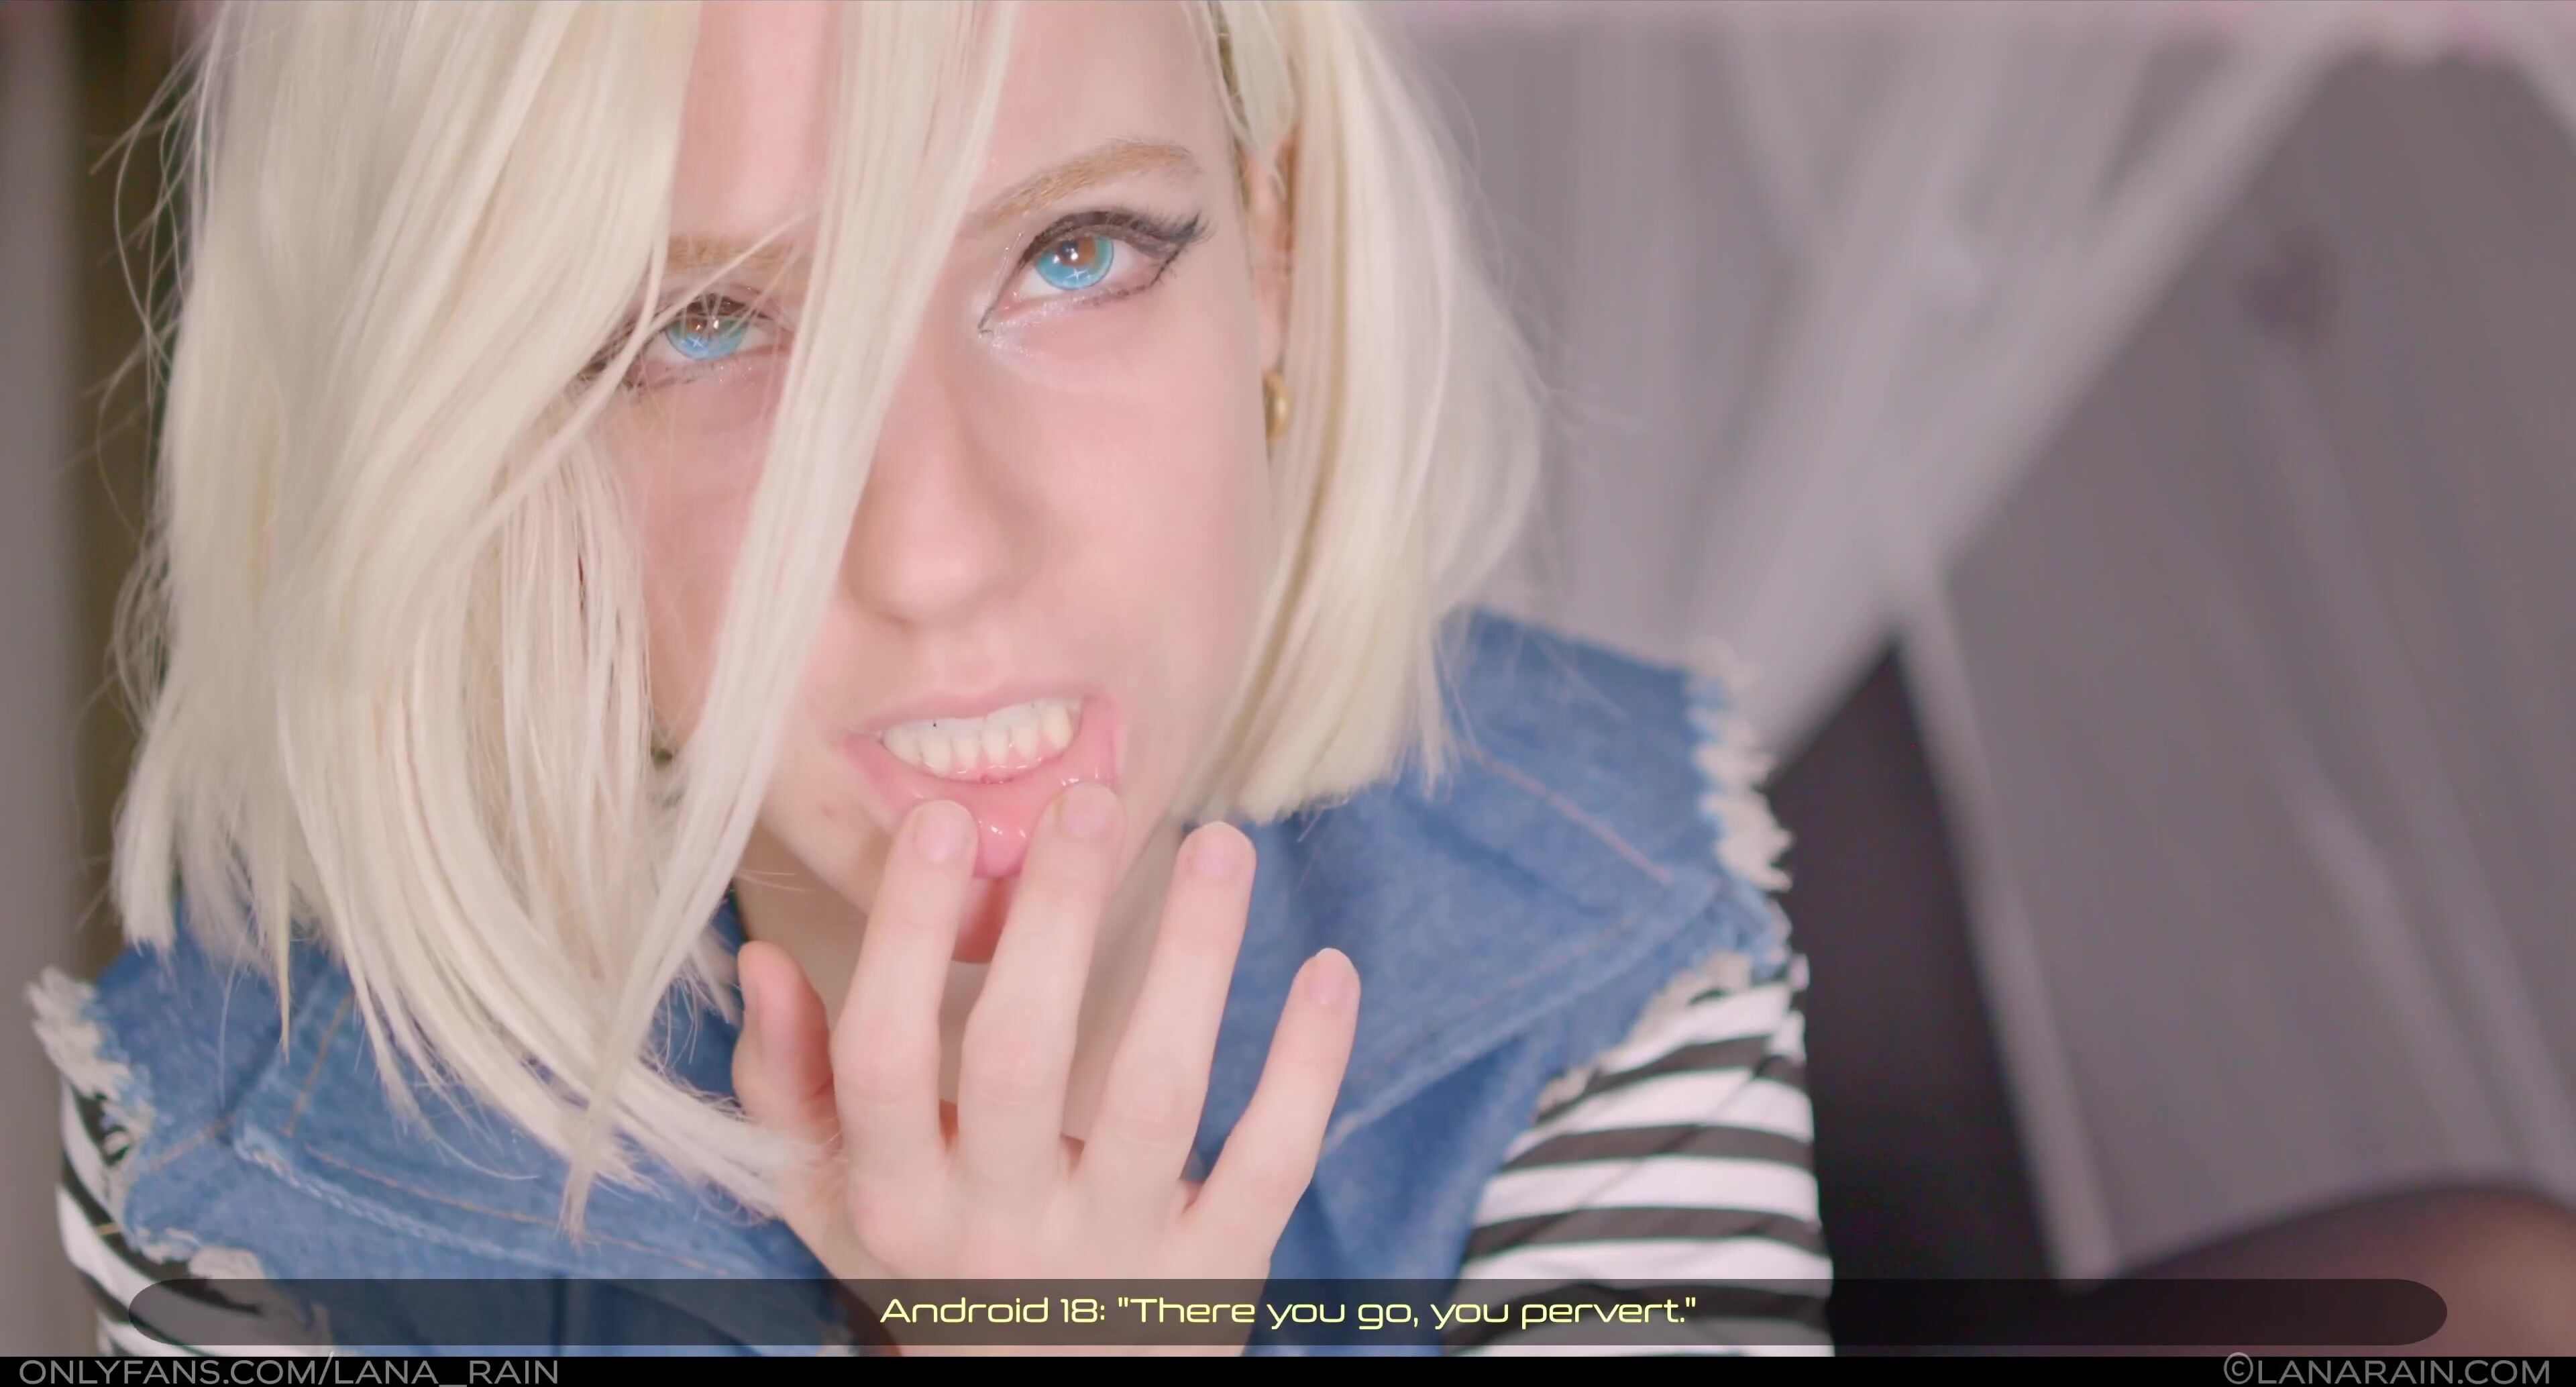 LR - Do You Want To Date Android 18 POV